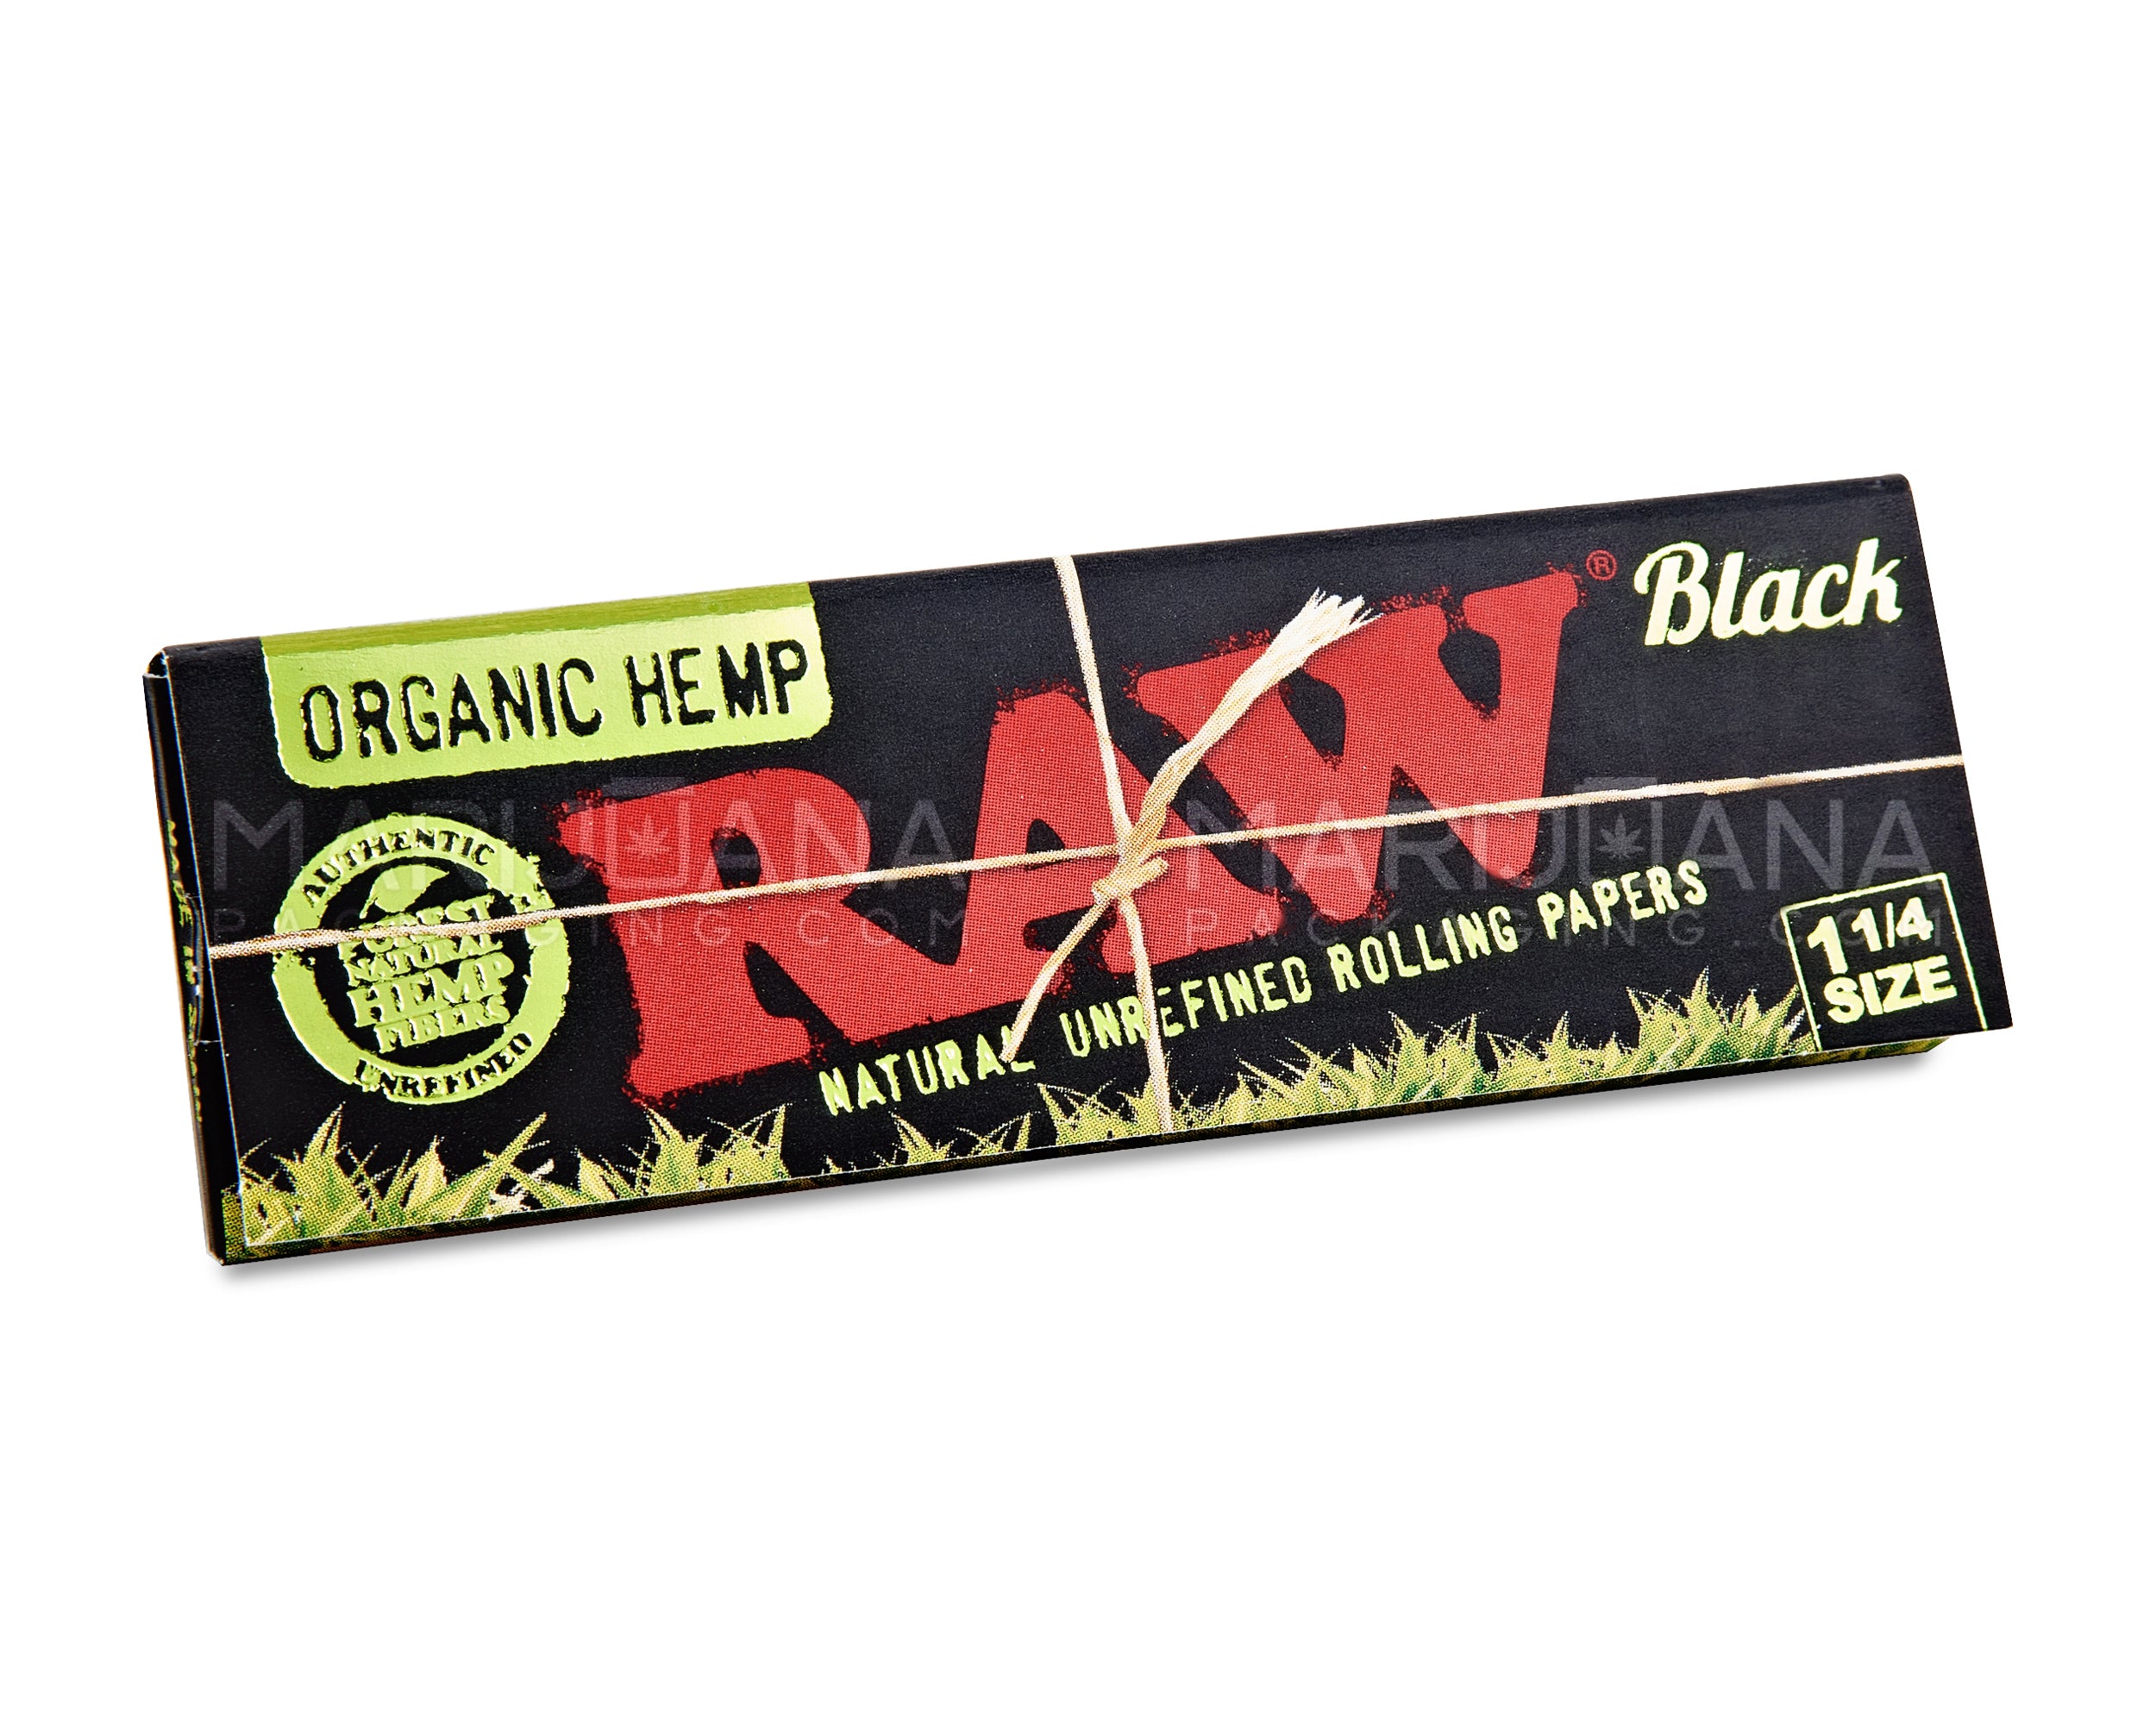 RAW | 'Retail Display' 1 1/4 Size Black Organic Hemp Rolling Papers | 84mm - Classic - 24 Count - 3